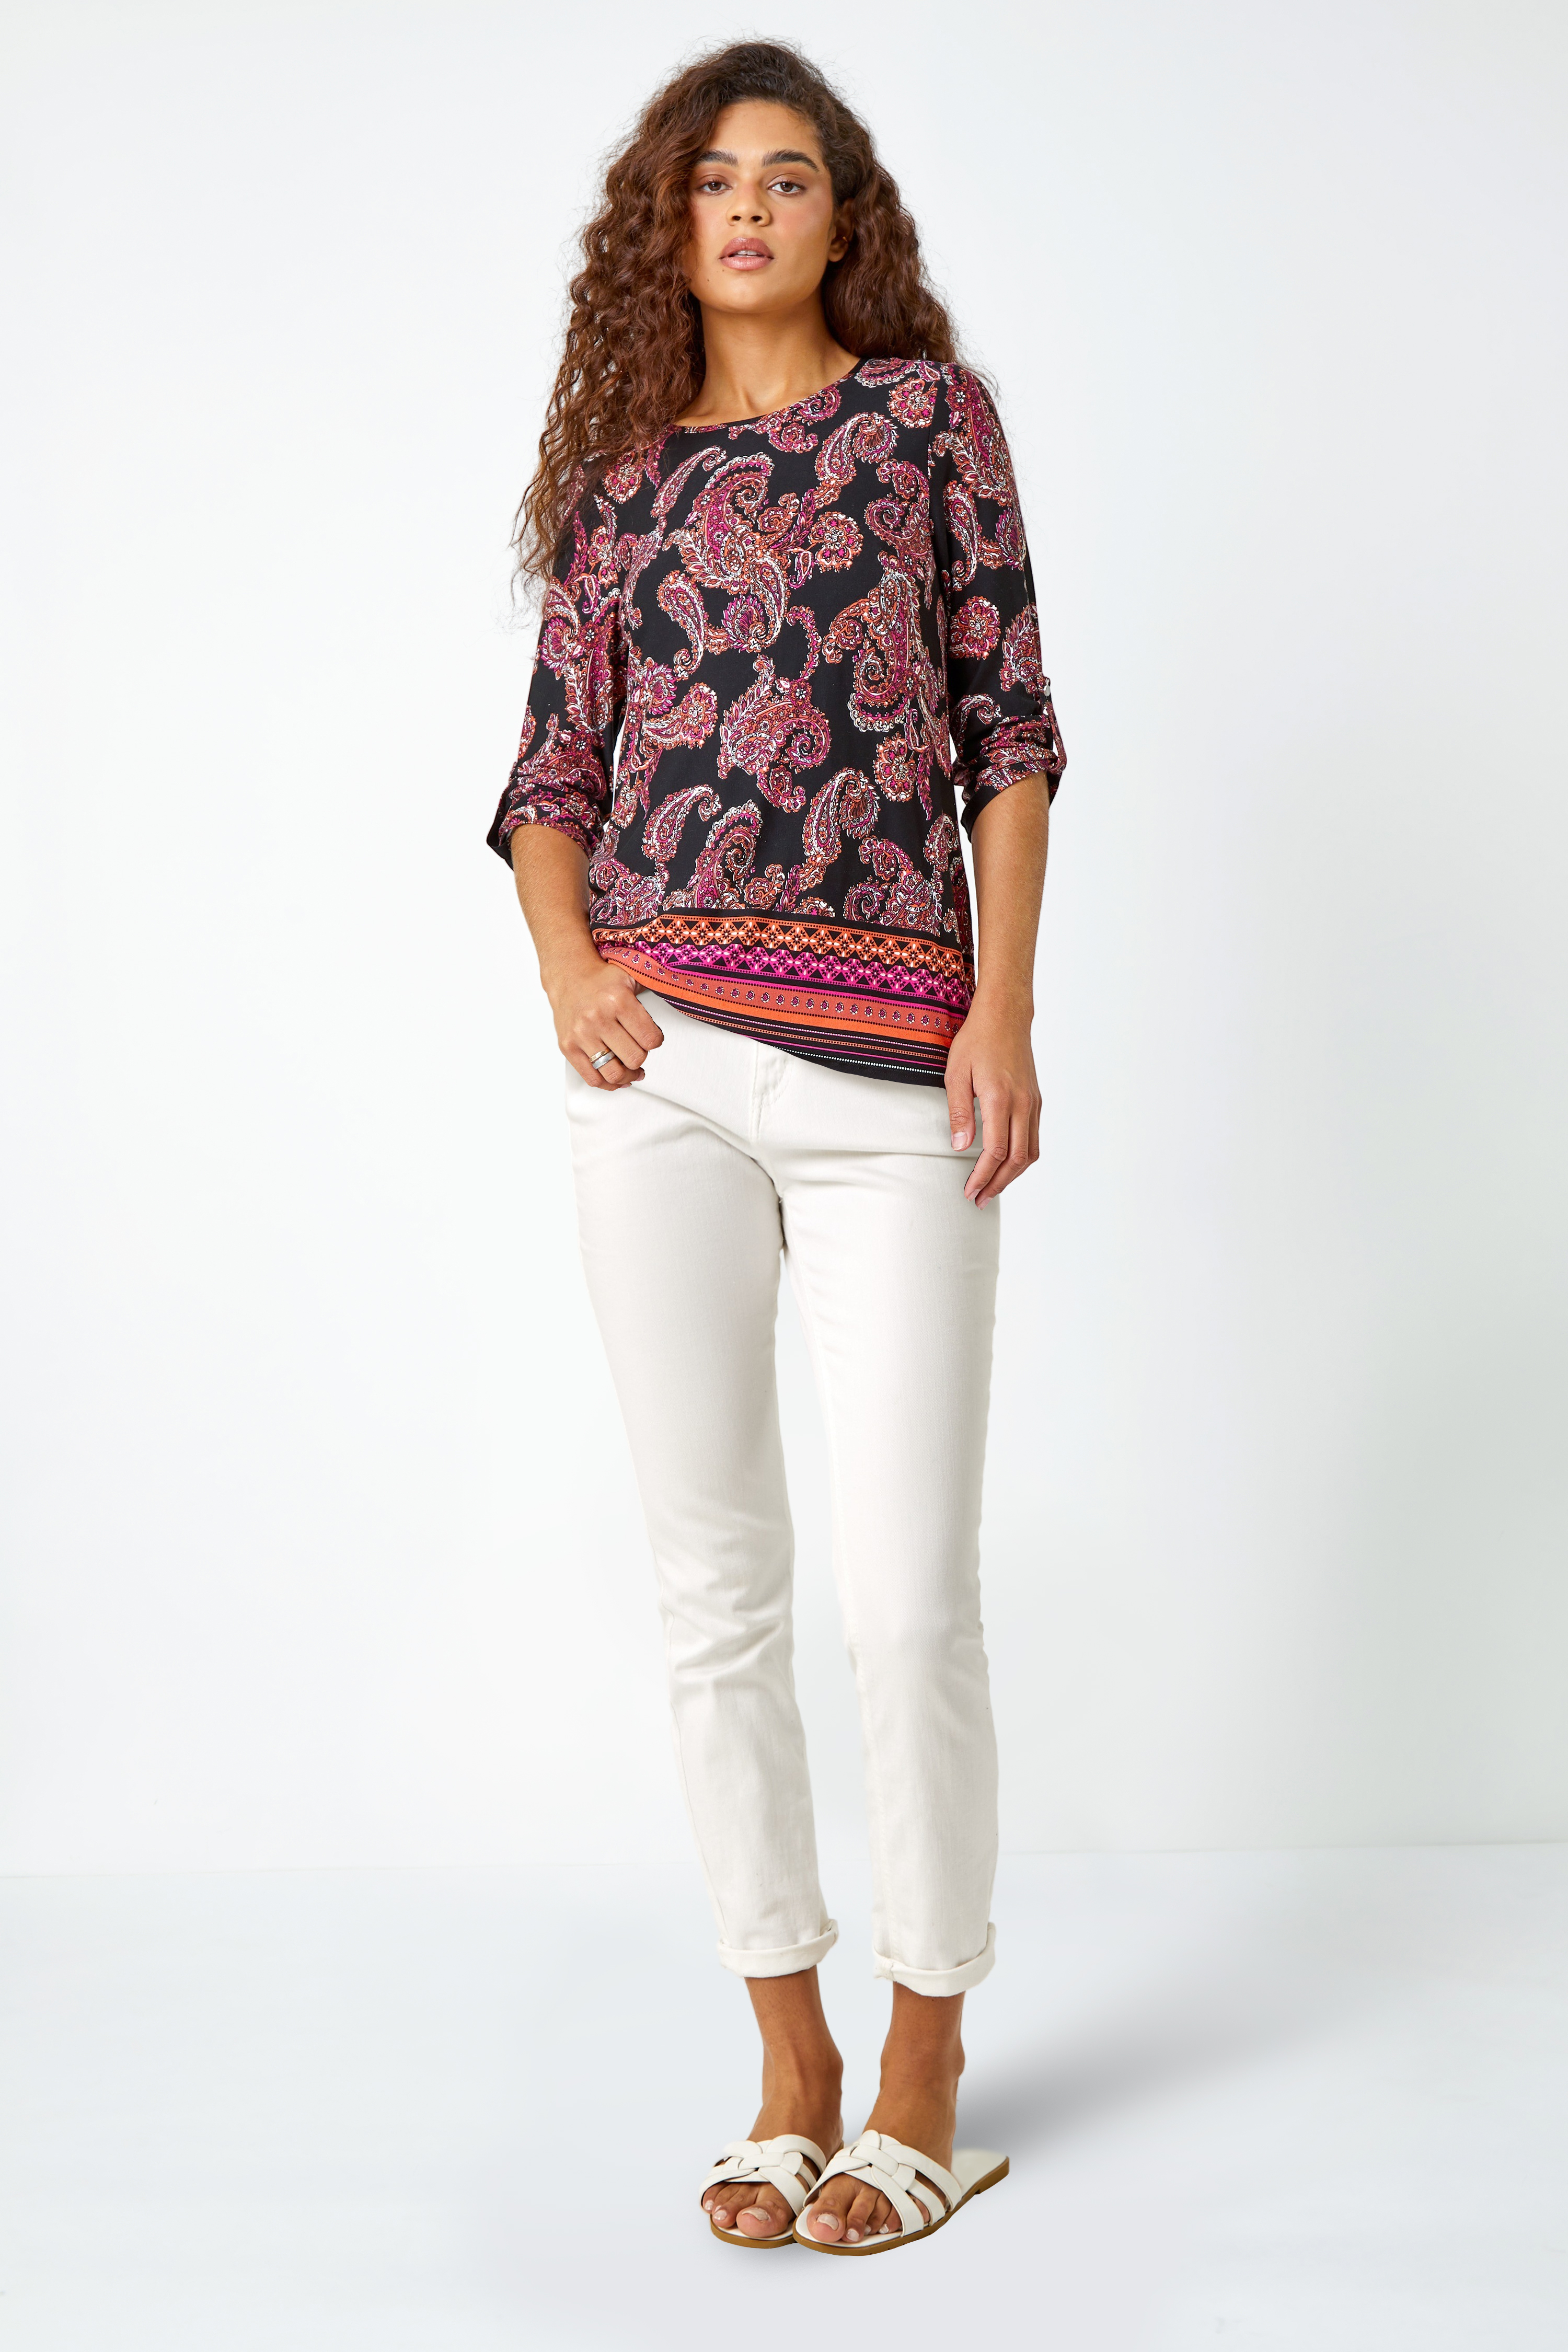 Red Paisley Border Print Tunic Stretch Top, Image 2 of 5